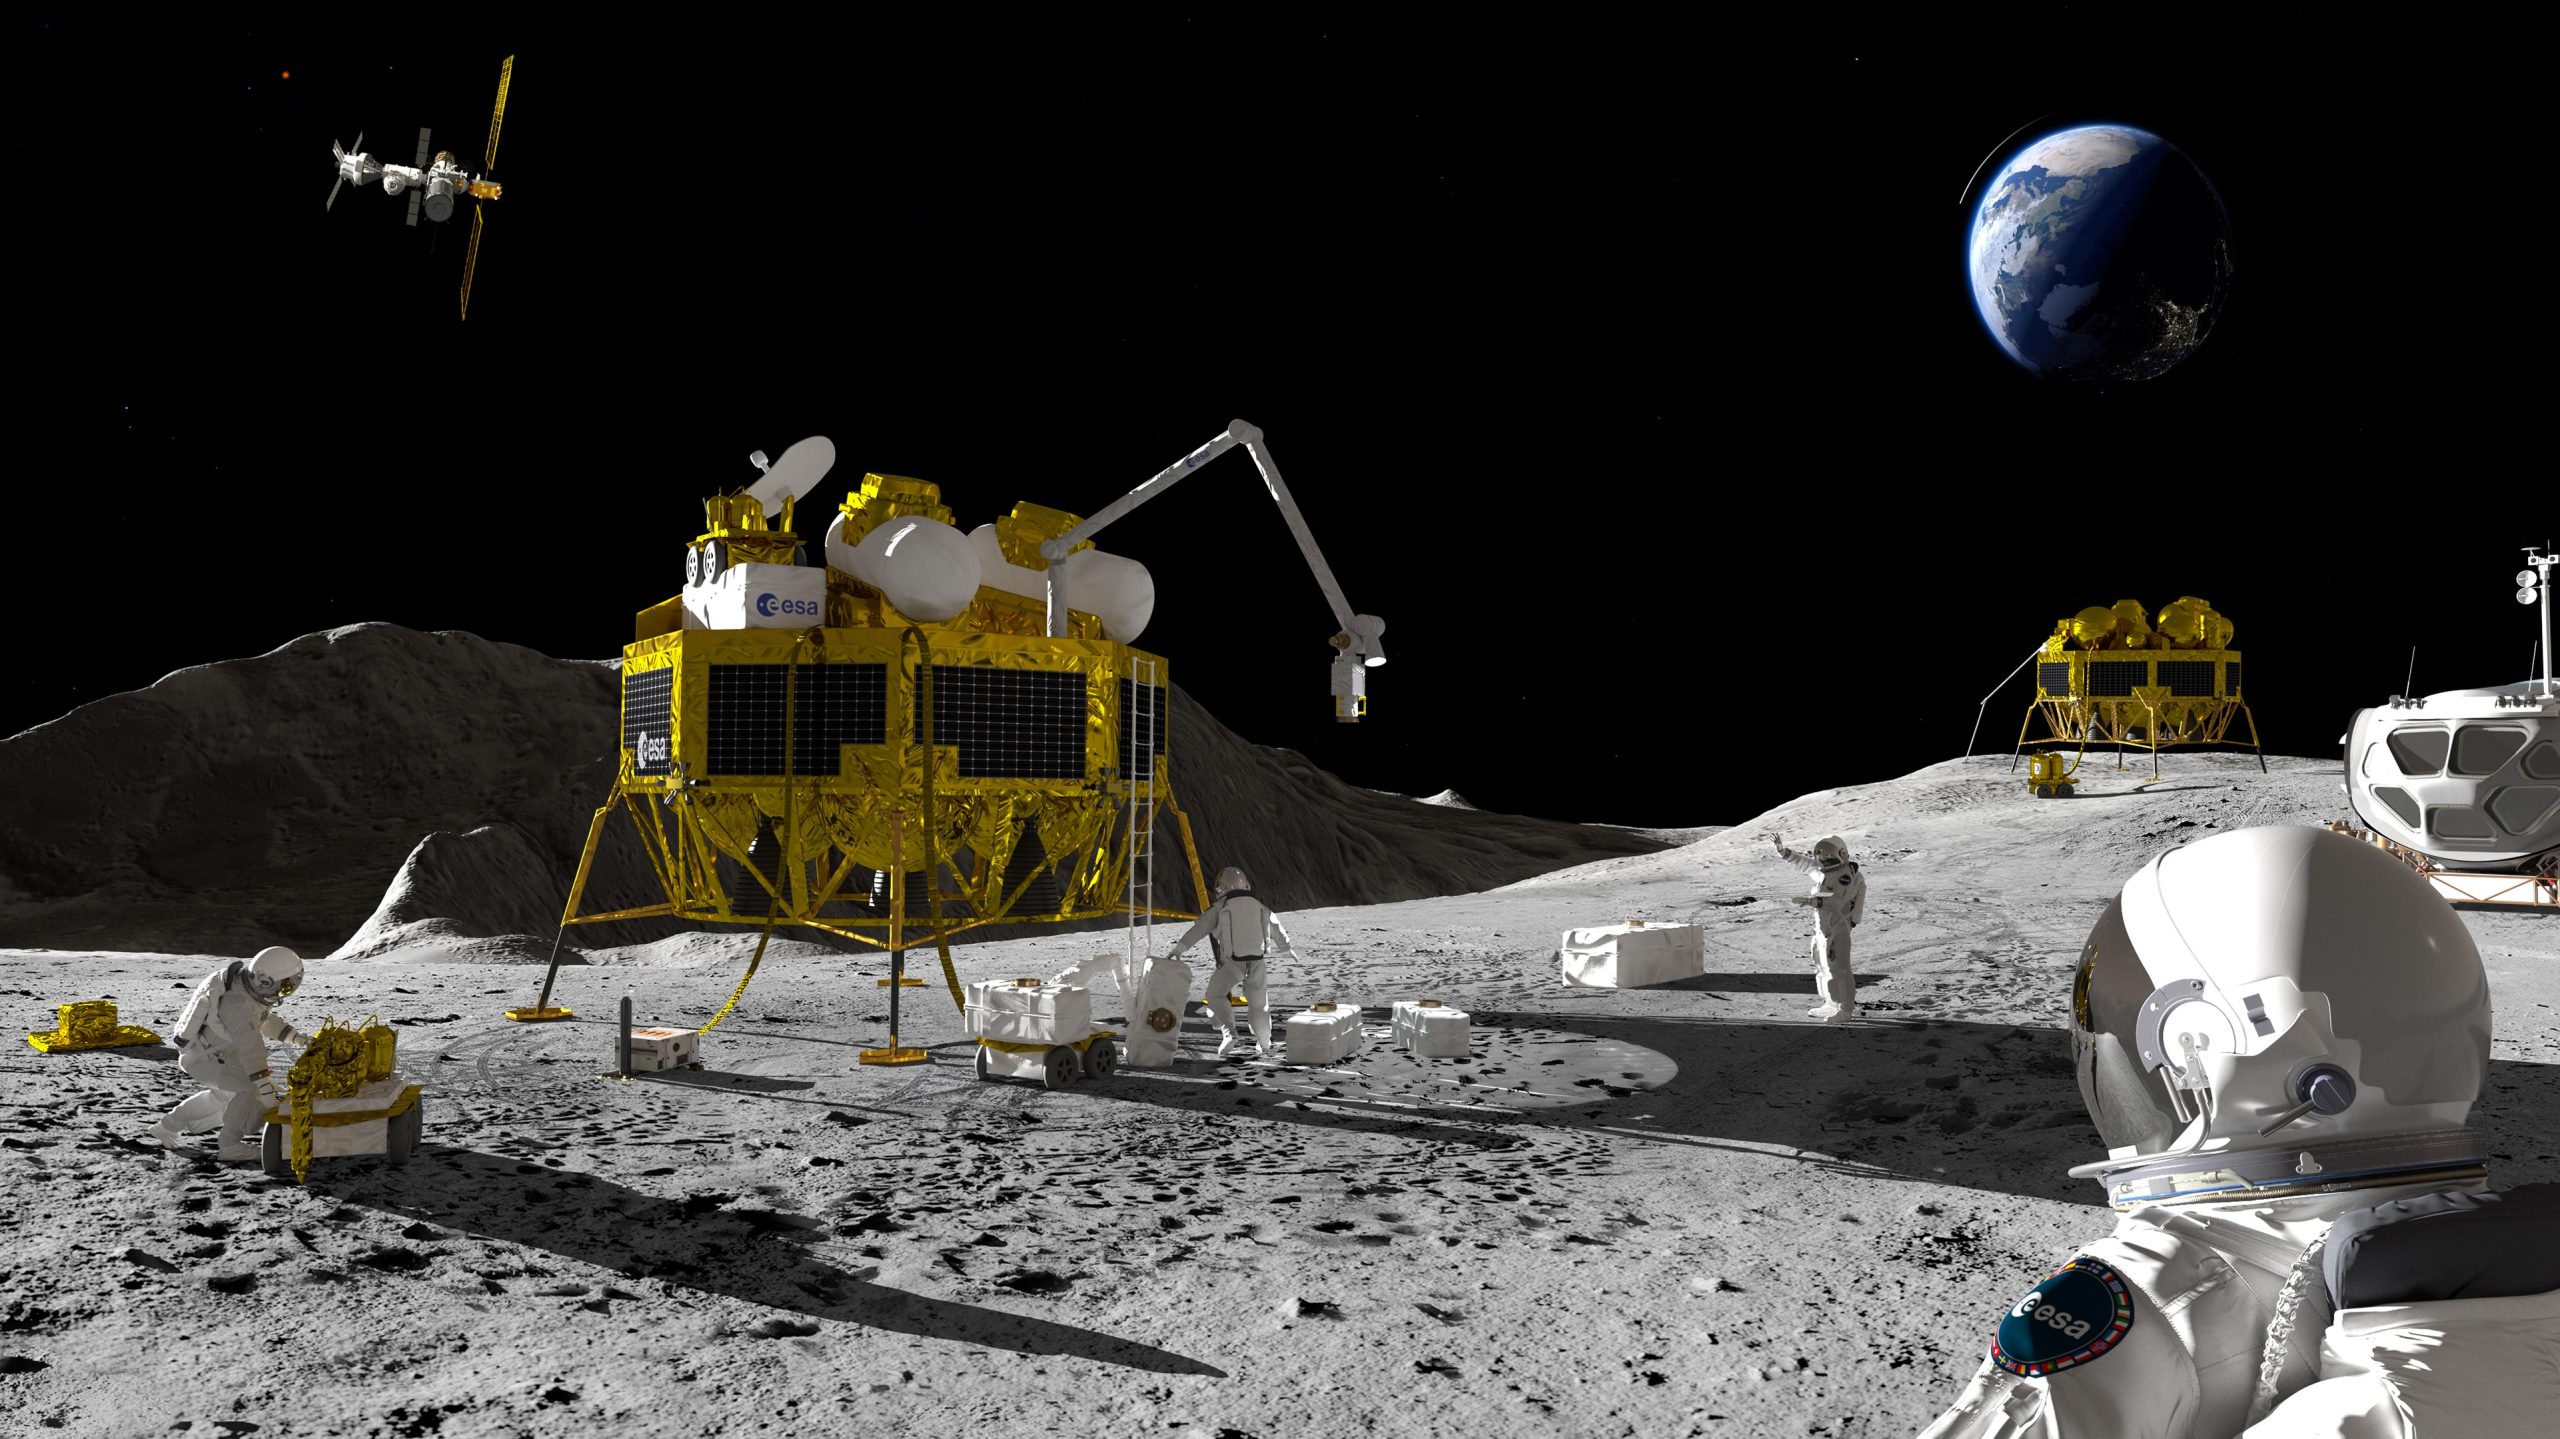 What time is it on the moon?  Development of a new lunar time zone